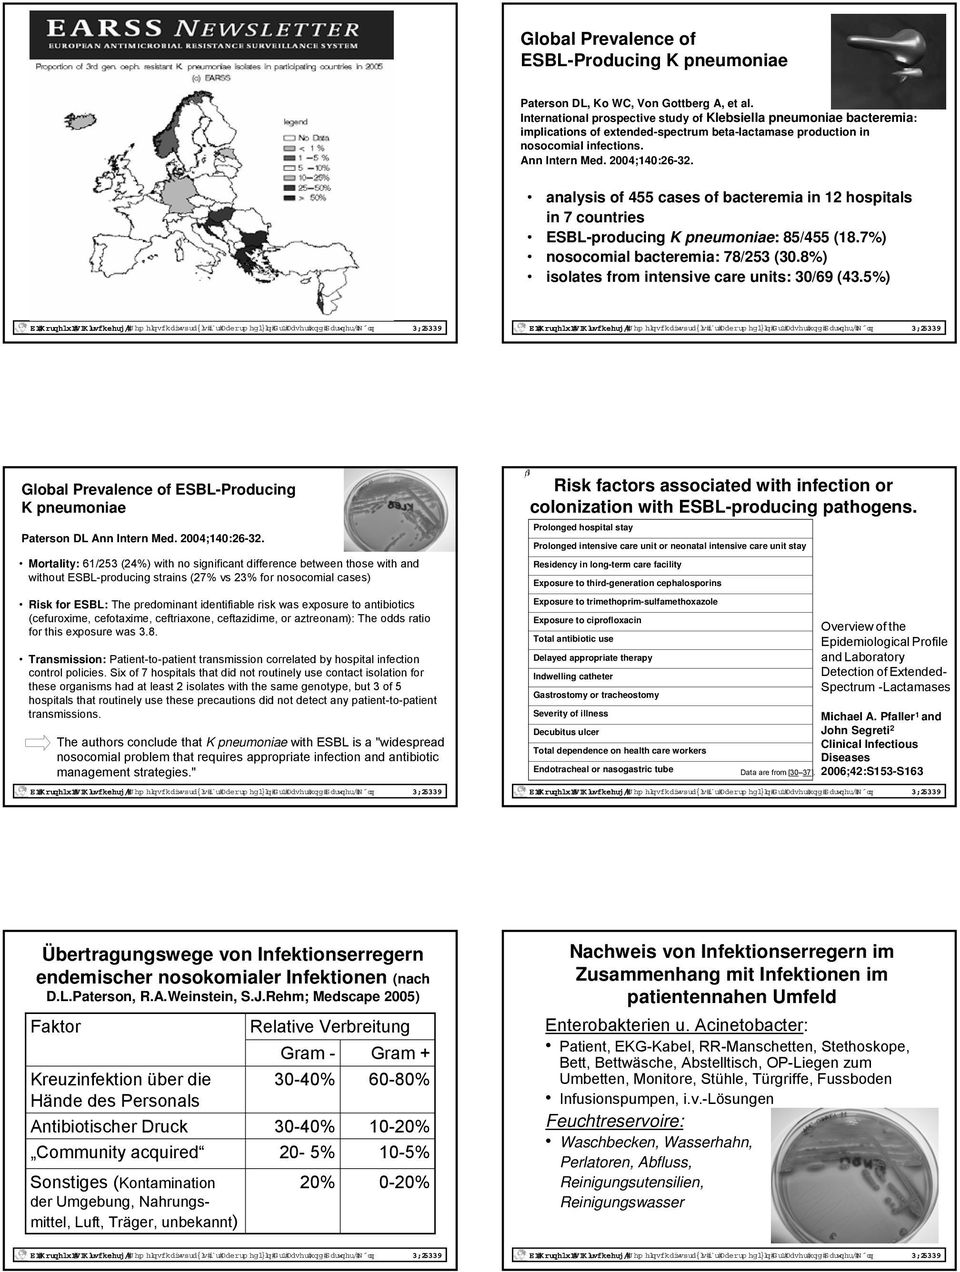 analysis of 455 cases of bacteremia in 2 hospitals in 7 countries -producing K pneumoniae: 85/455 (8.7%) nosocomial bacteremia: 78/253 (30.8%) isolates from intensive care units: 30/69 (43.